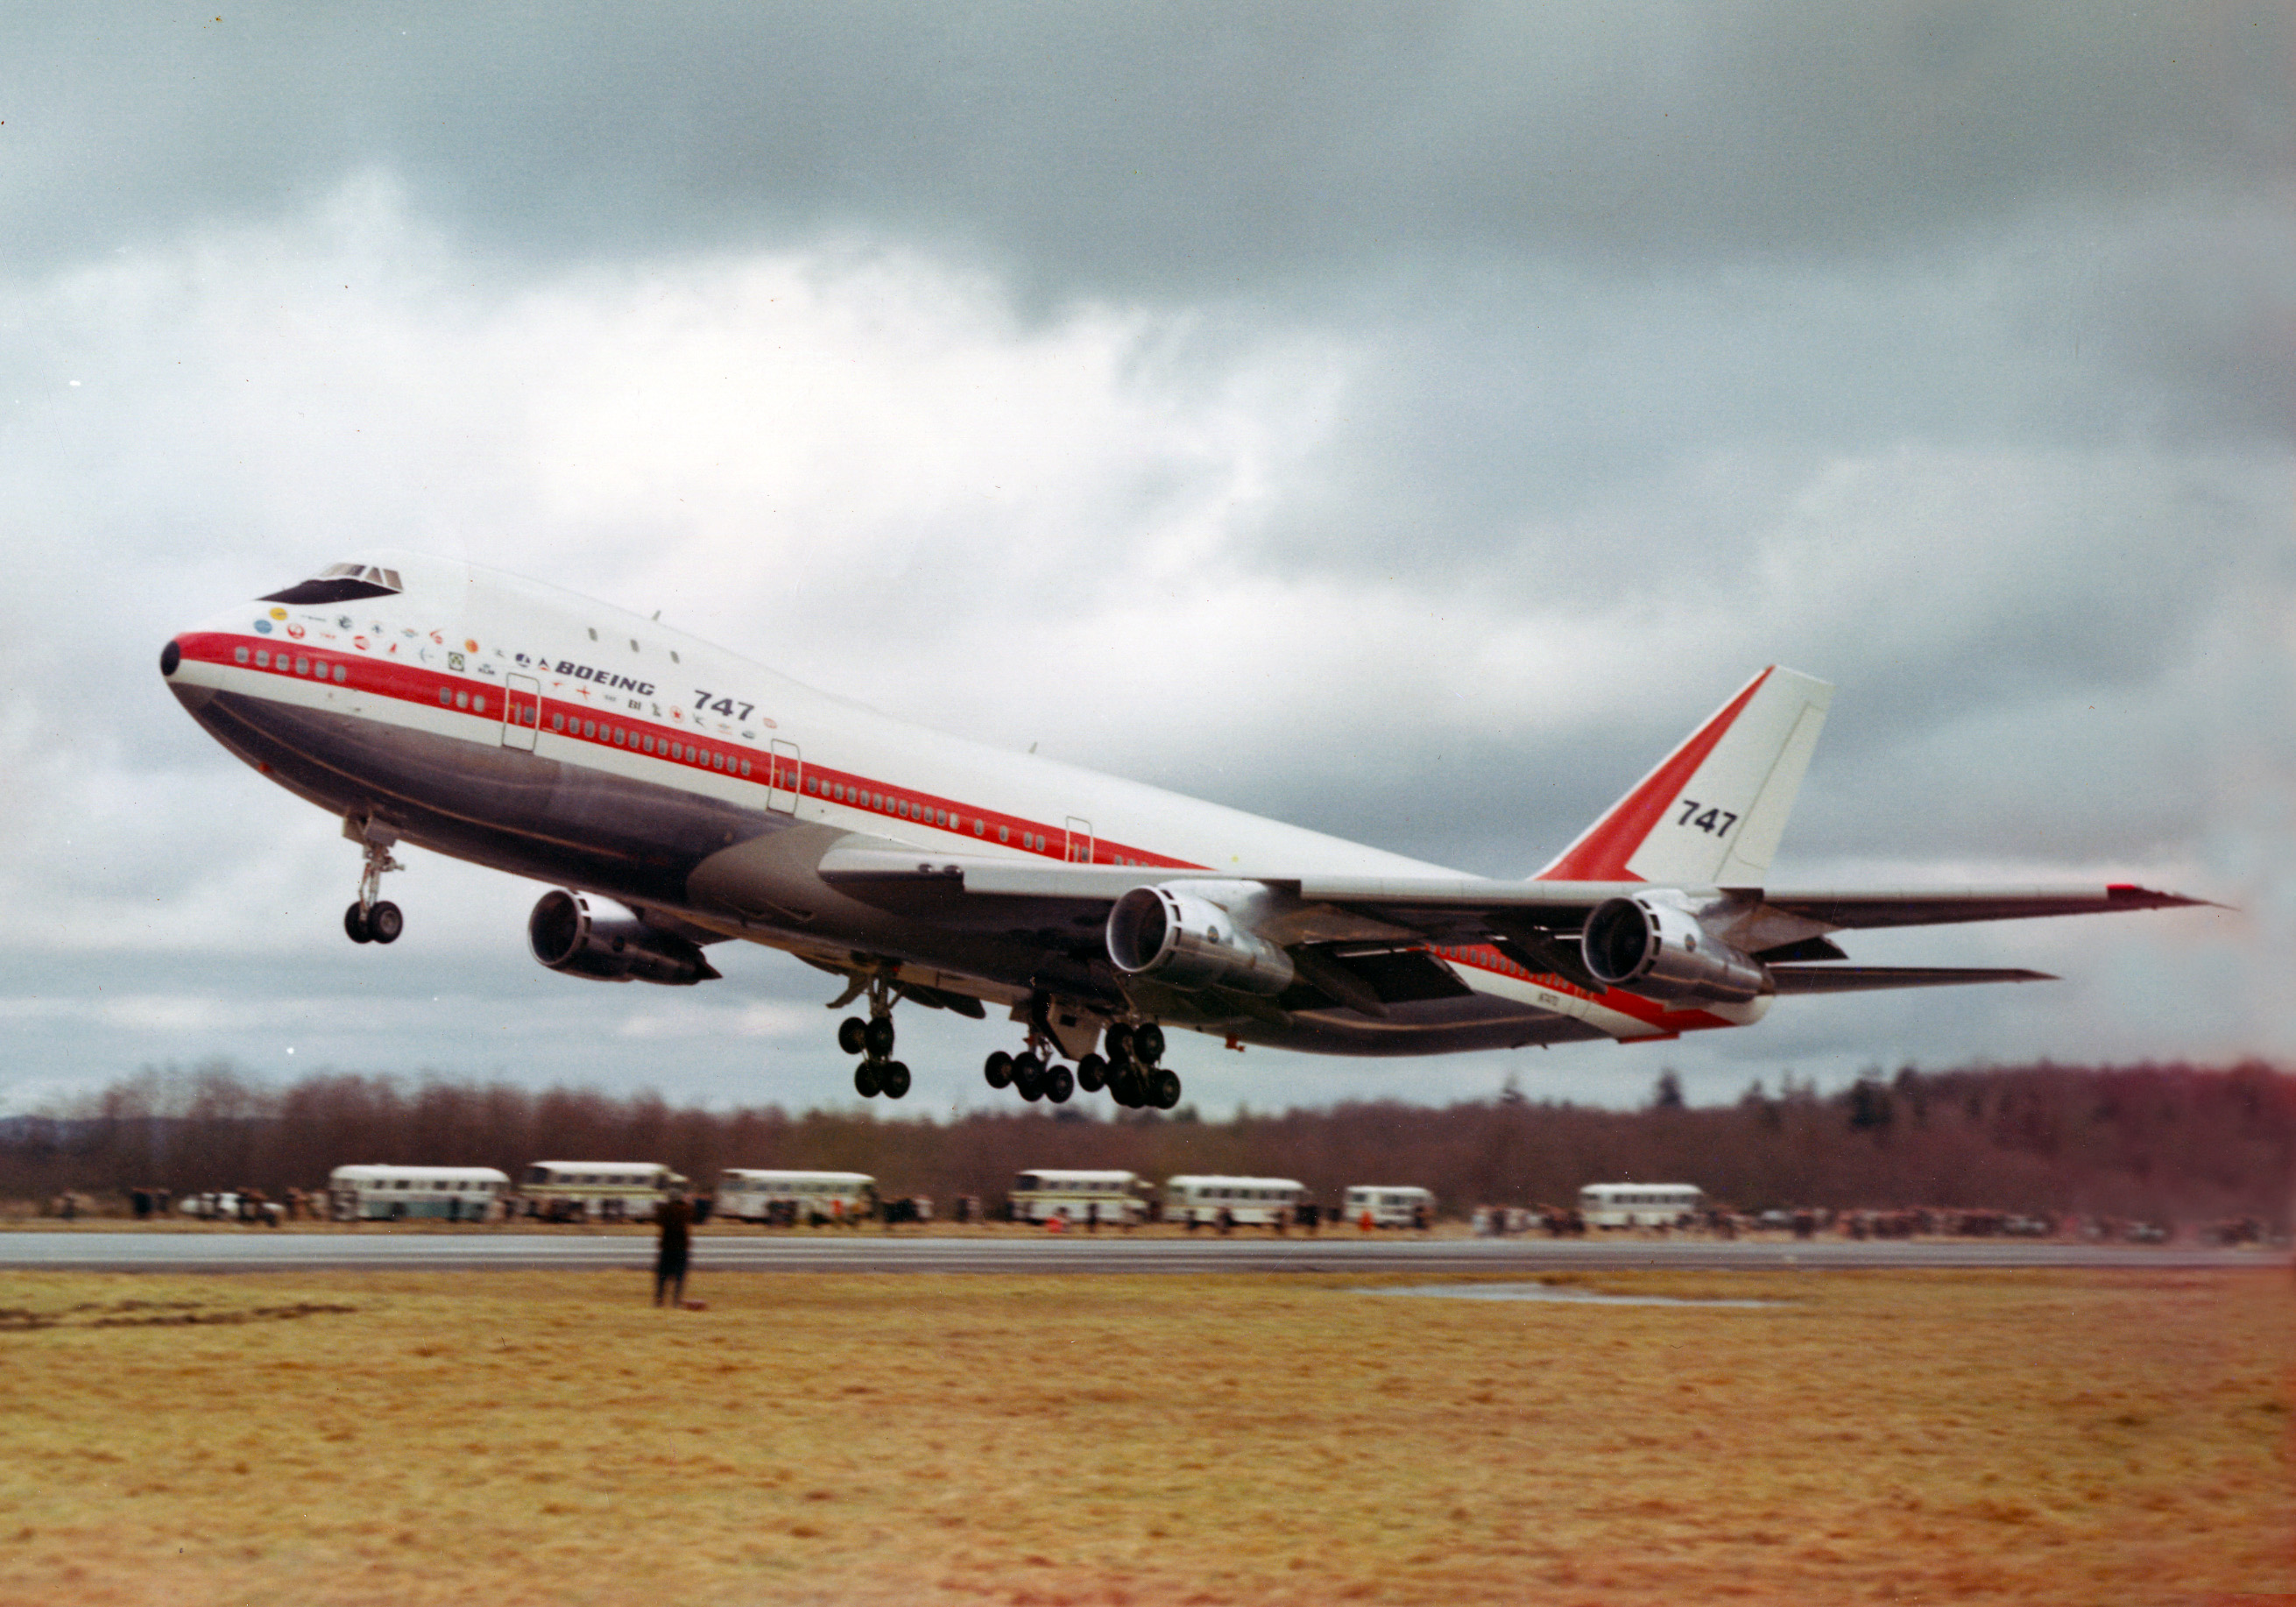 The prototype Boeing 747, N7470, City of Everett, takes off at Paine Field, 9 February 1969. (Boeing/The Museum of Flight)